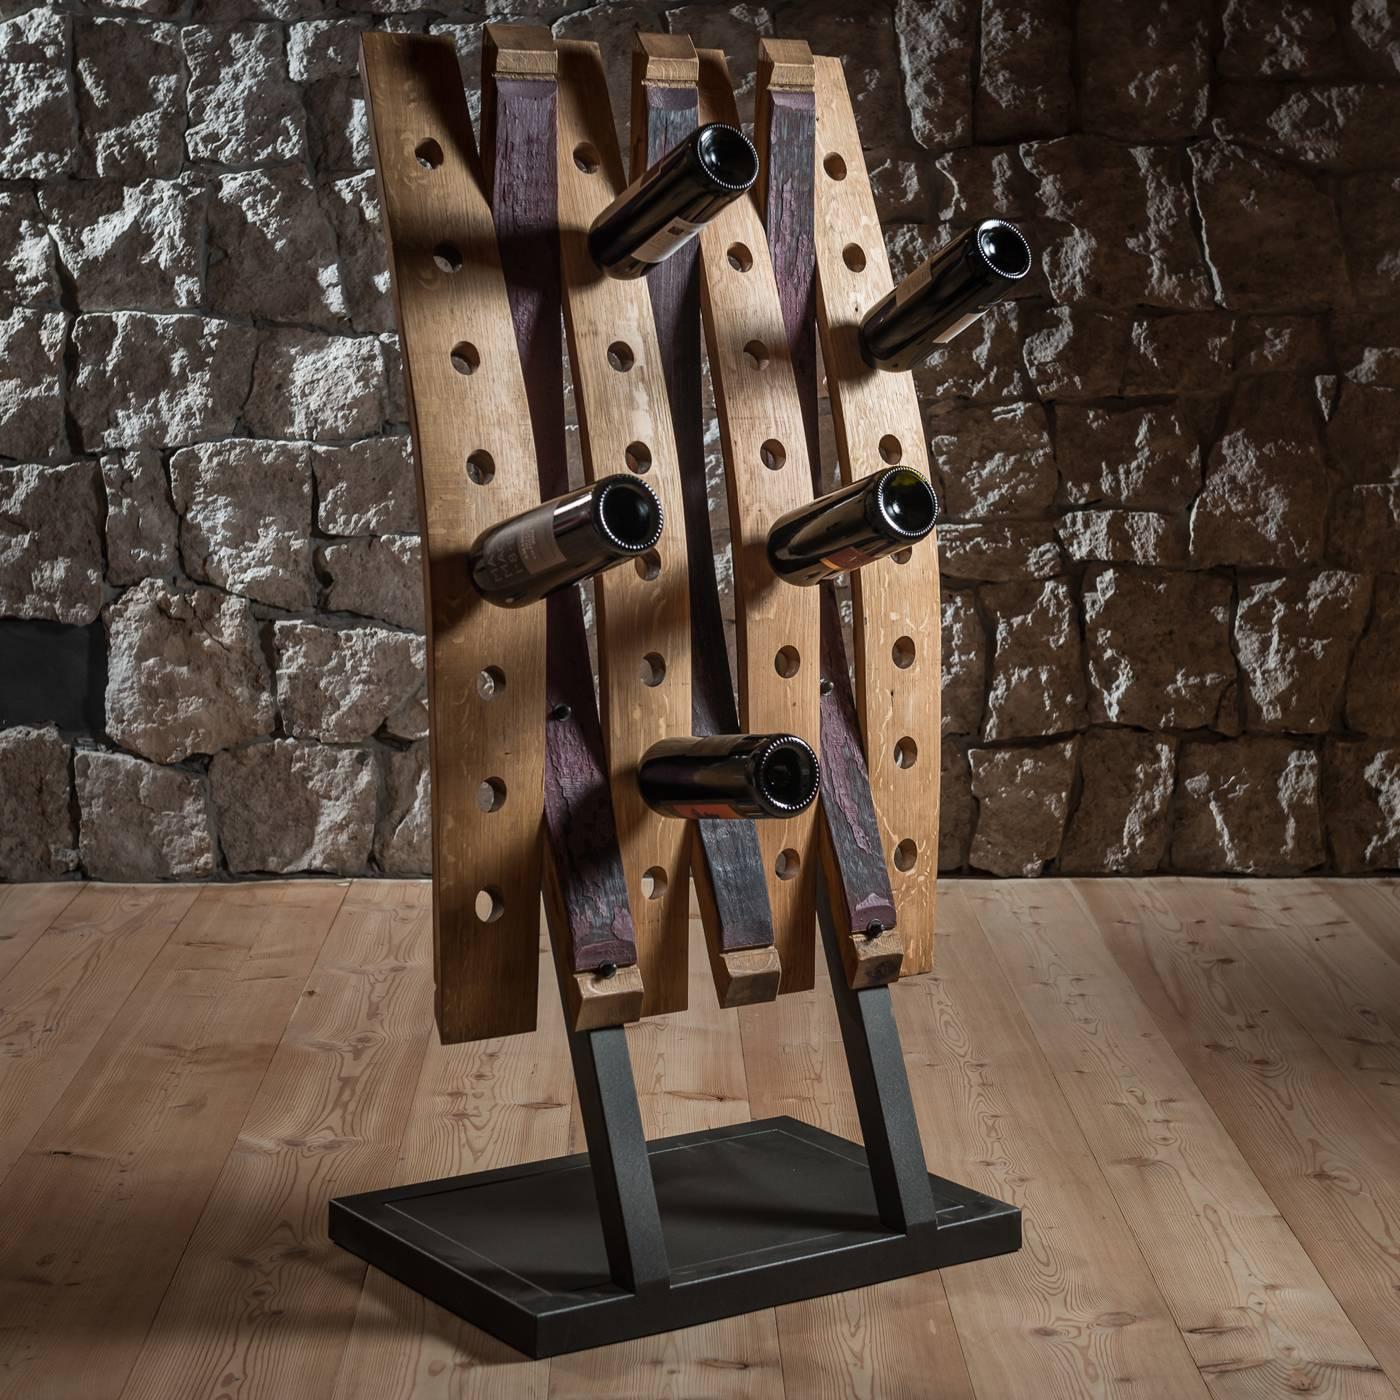 Handcrafted with parts of wood barrels used to ferment Amarone wine, the staves used for this unique wine rack were selected specifically for the rich violet nuance inherited from the wine they contained. Seven slates are intersected facing each